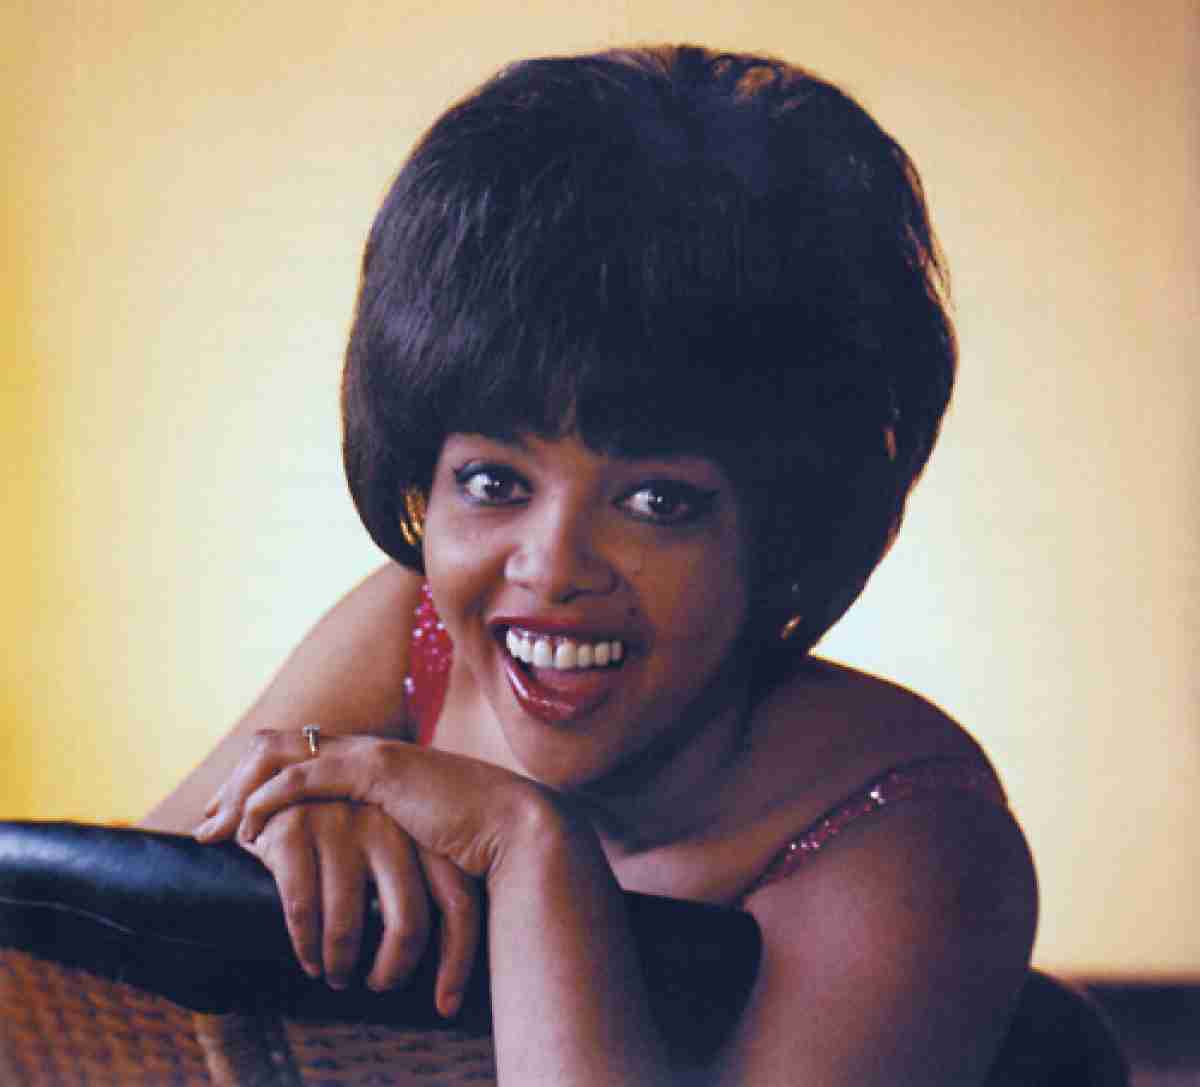 Not in Hall of Fame - 276. Tammi Terrell